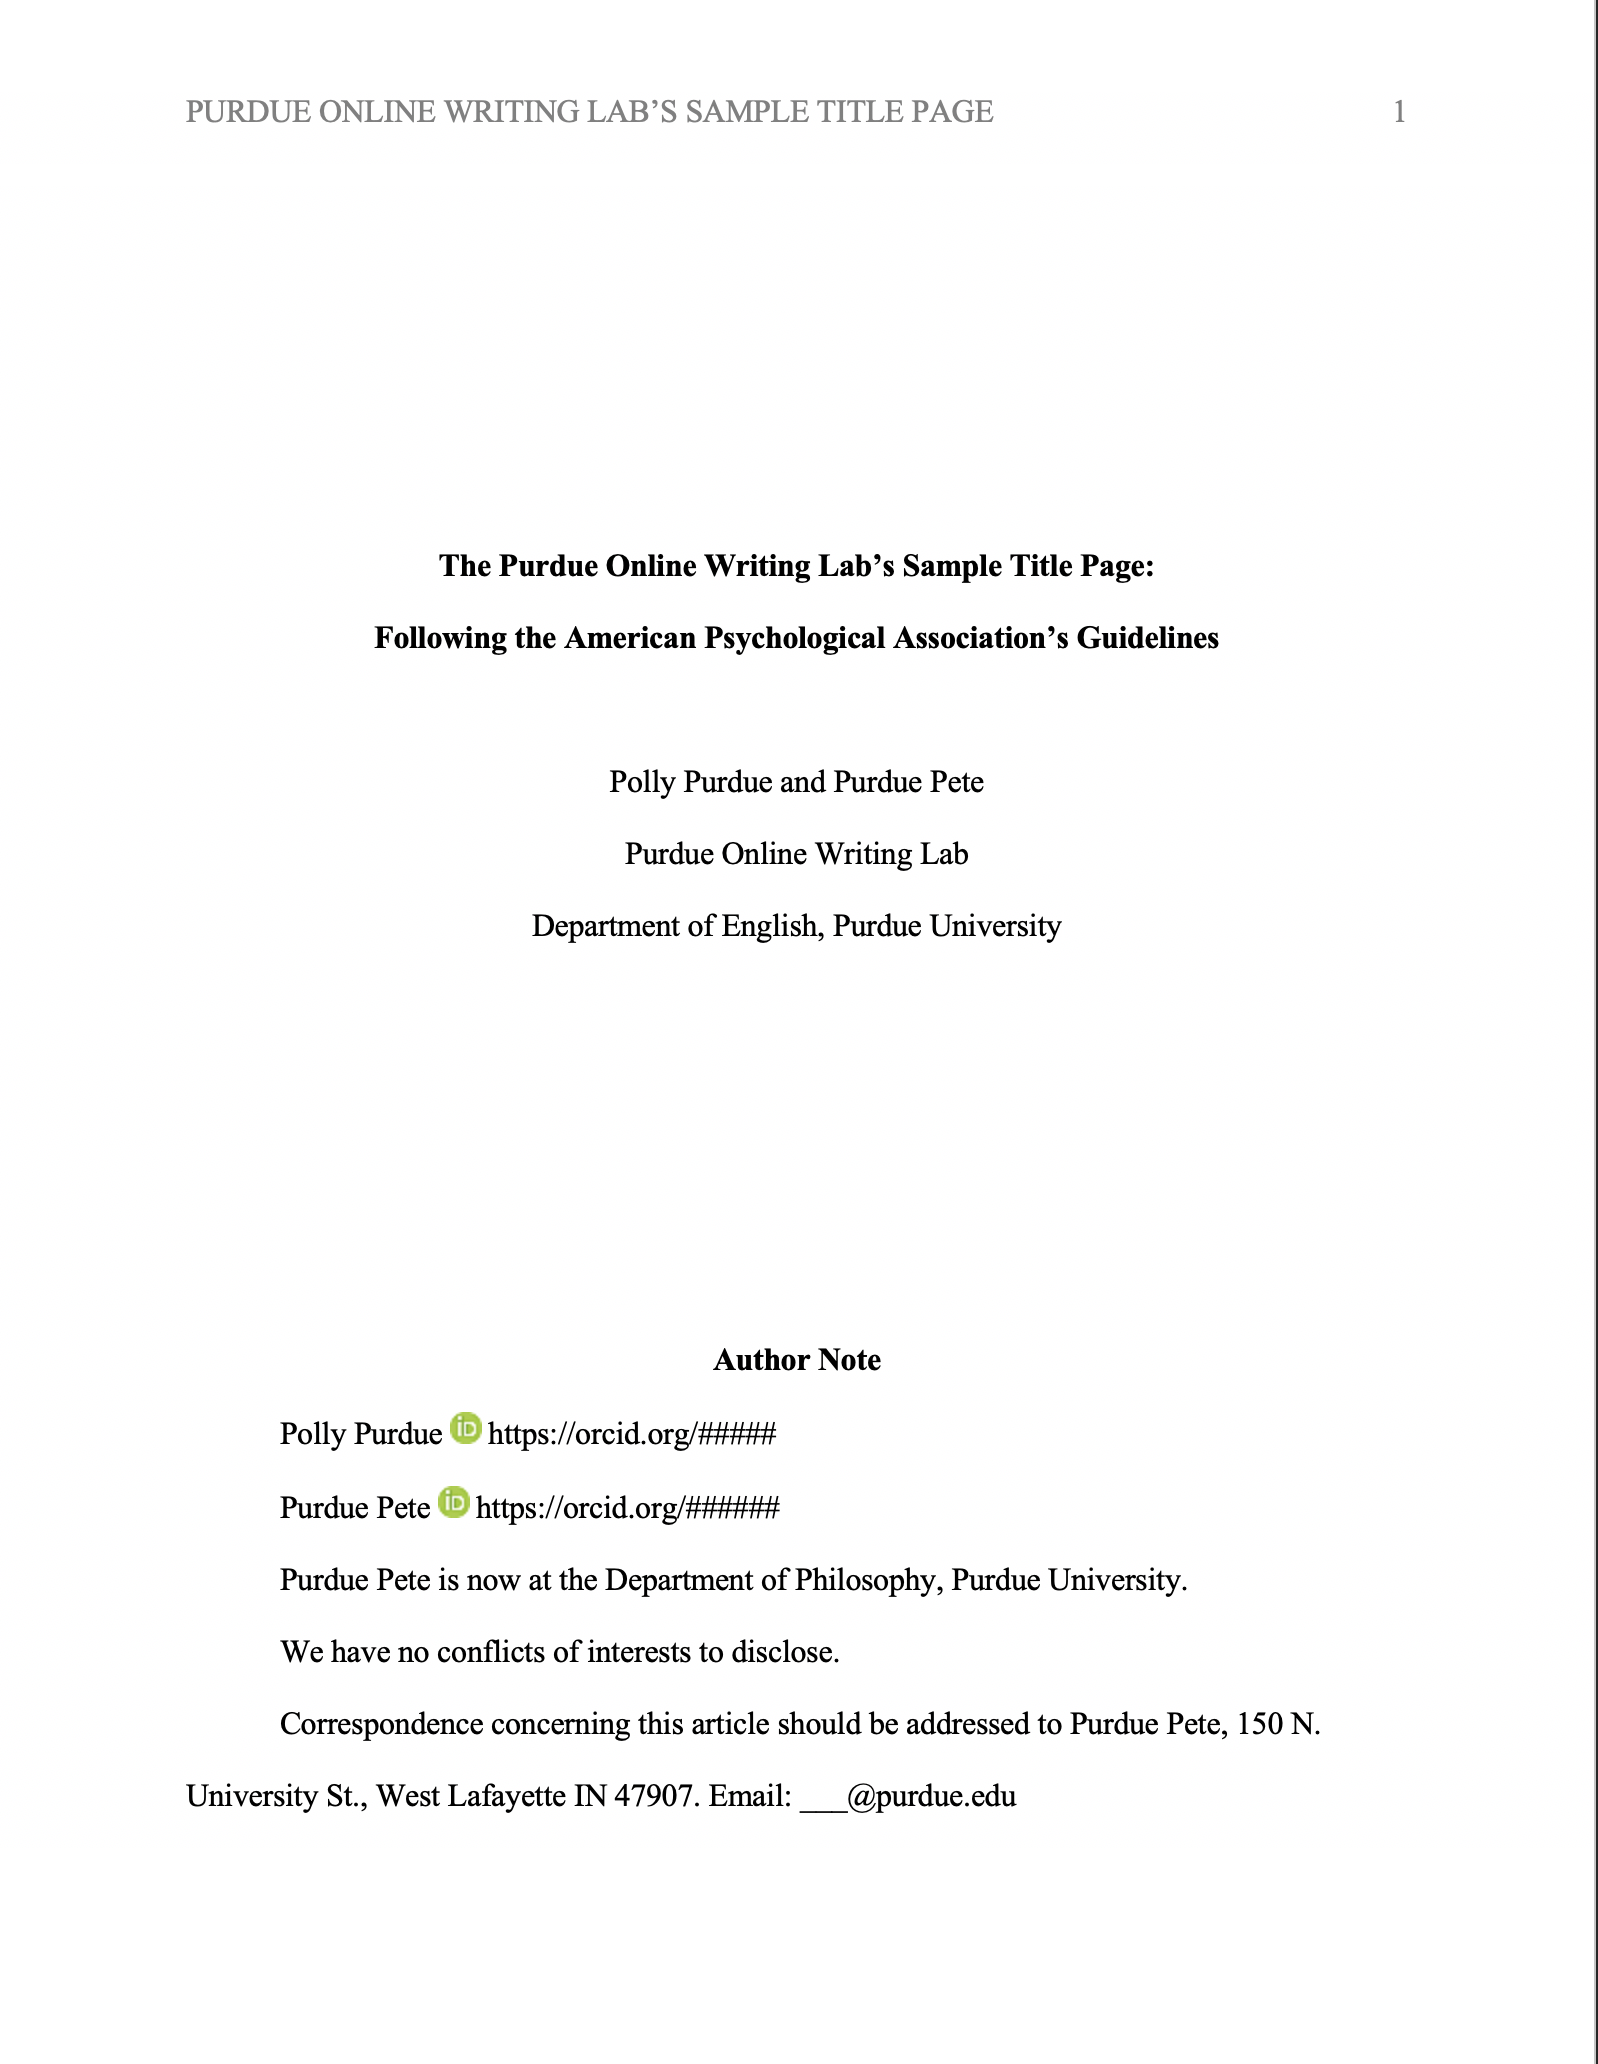 On image shows the designation side for a pros APA seventh edition paper.